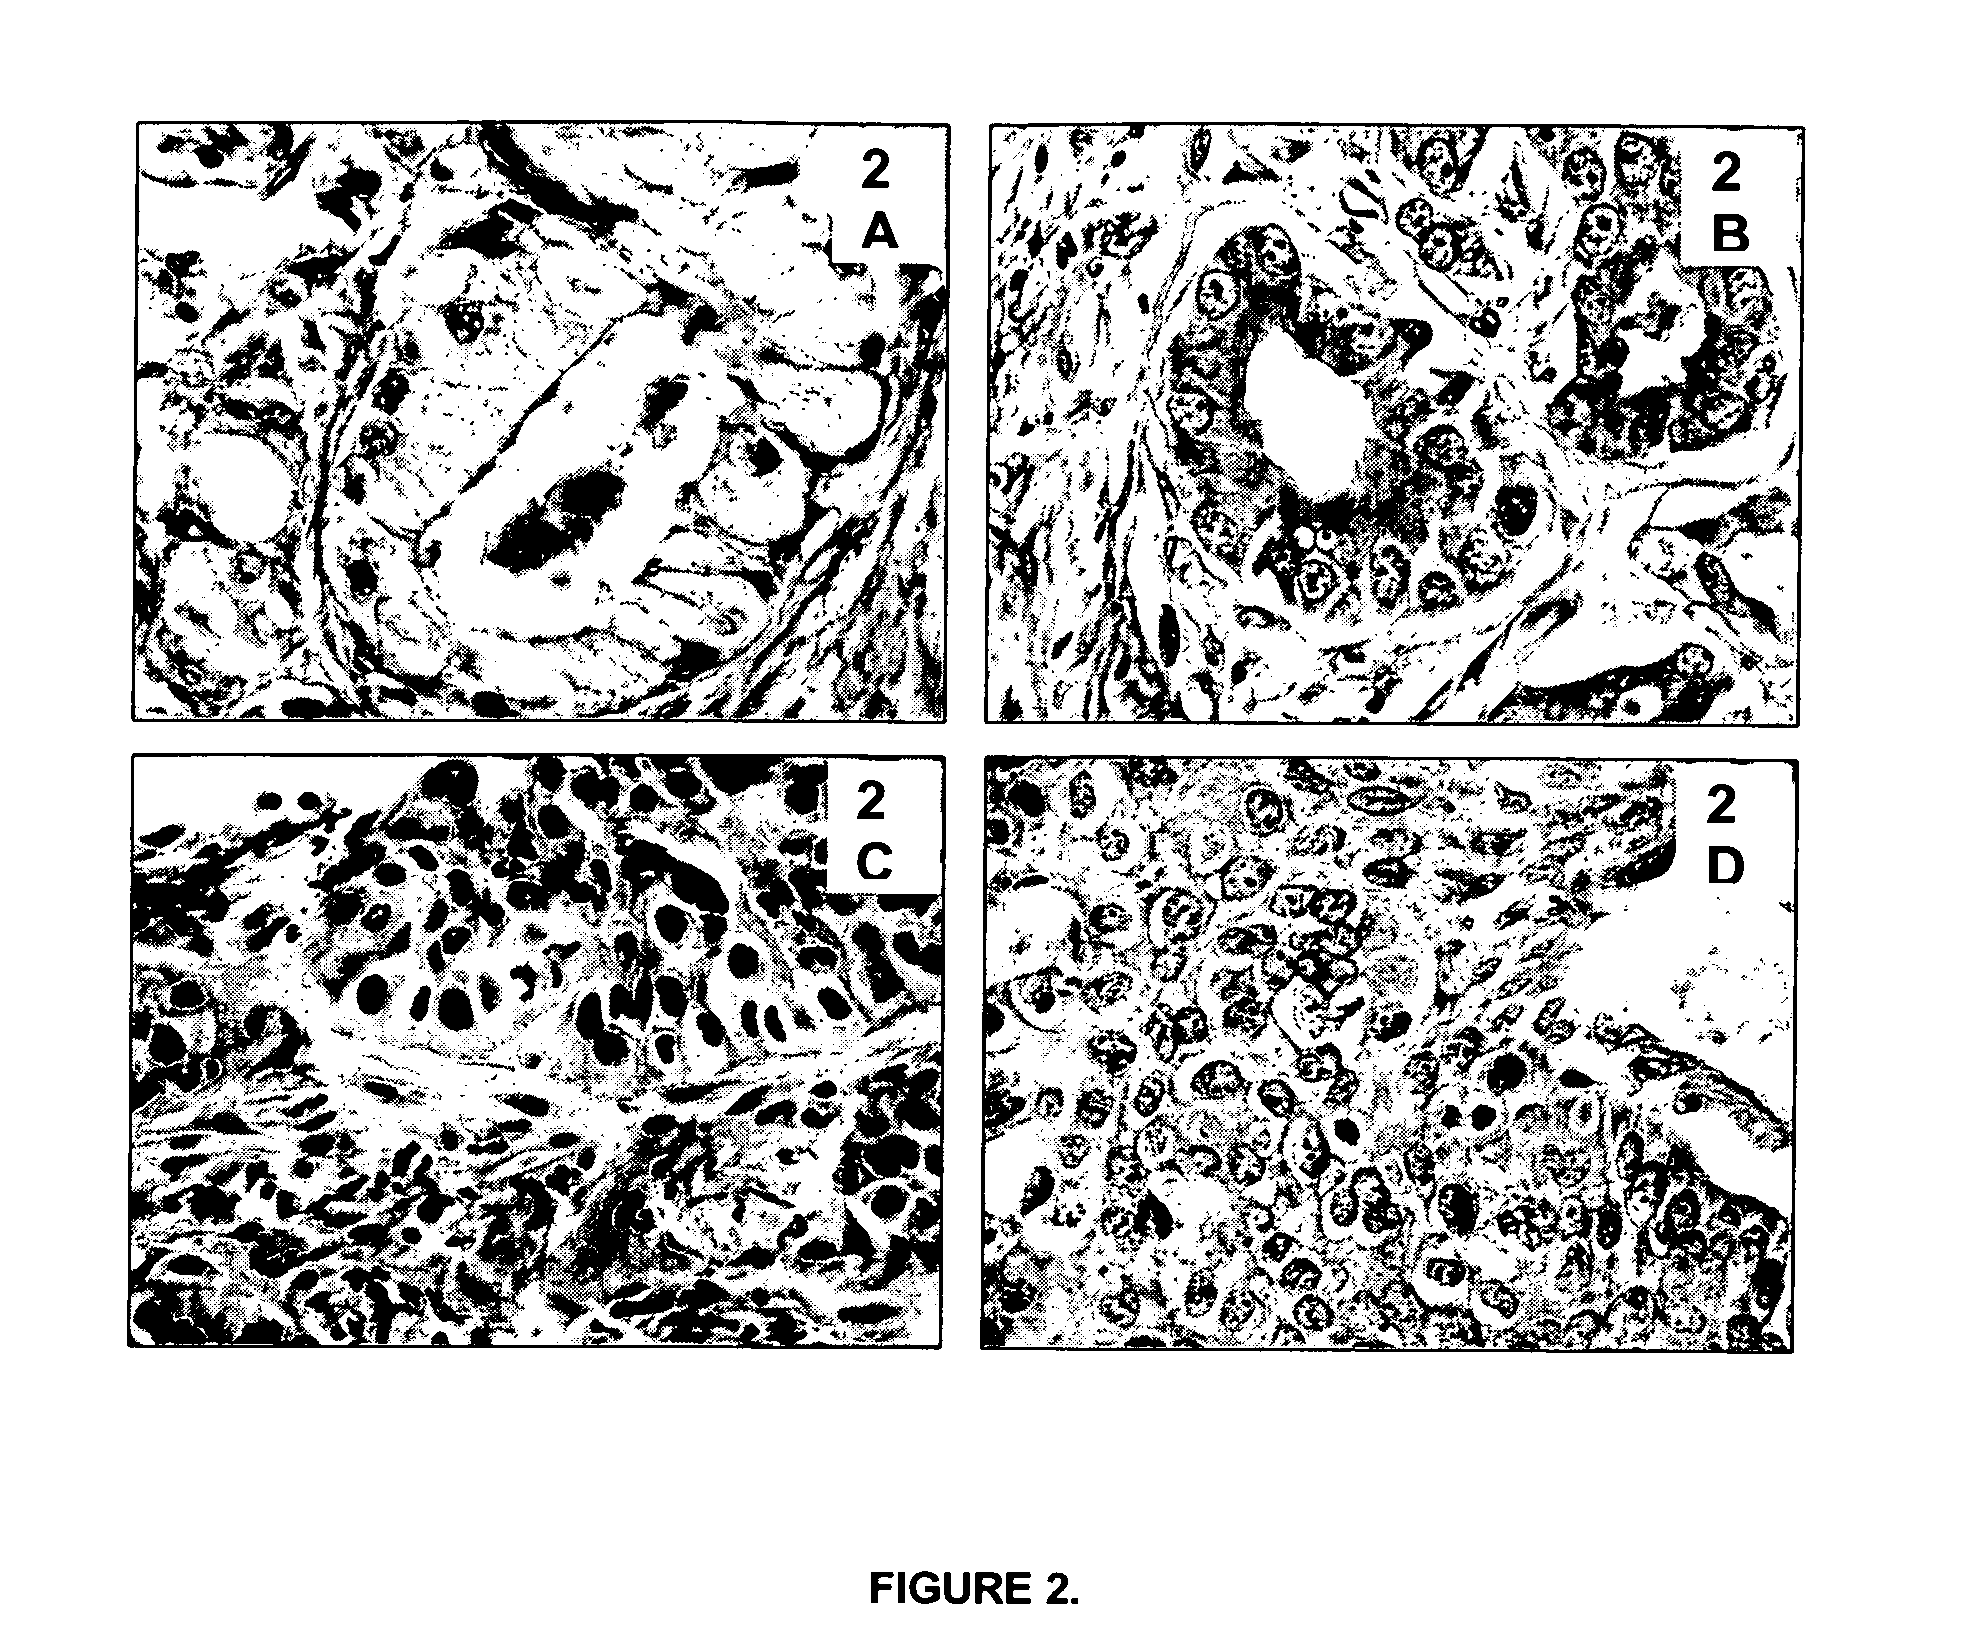 Methods, Reagents, Devices and Instrumentation For Preparing Impregnated Tissue Samples Suitable For Histopathological and Molecular Studies